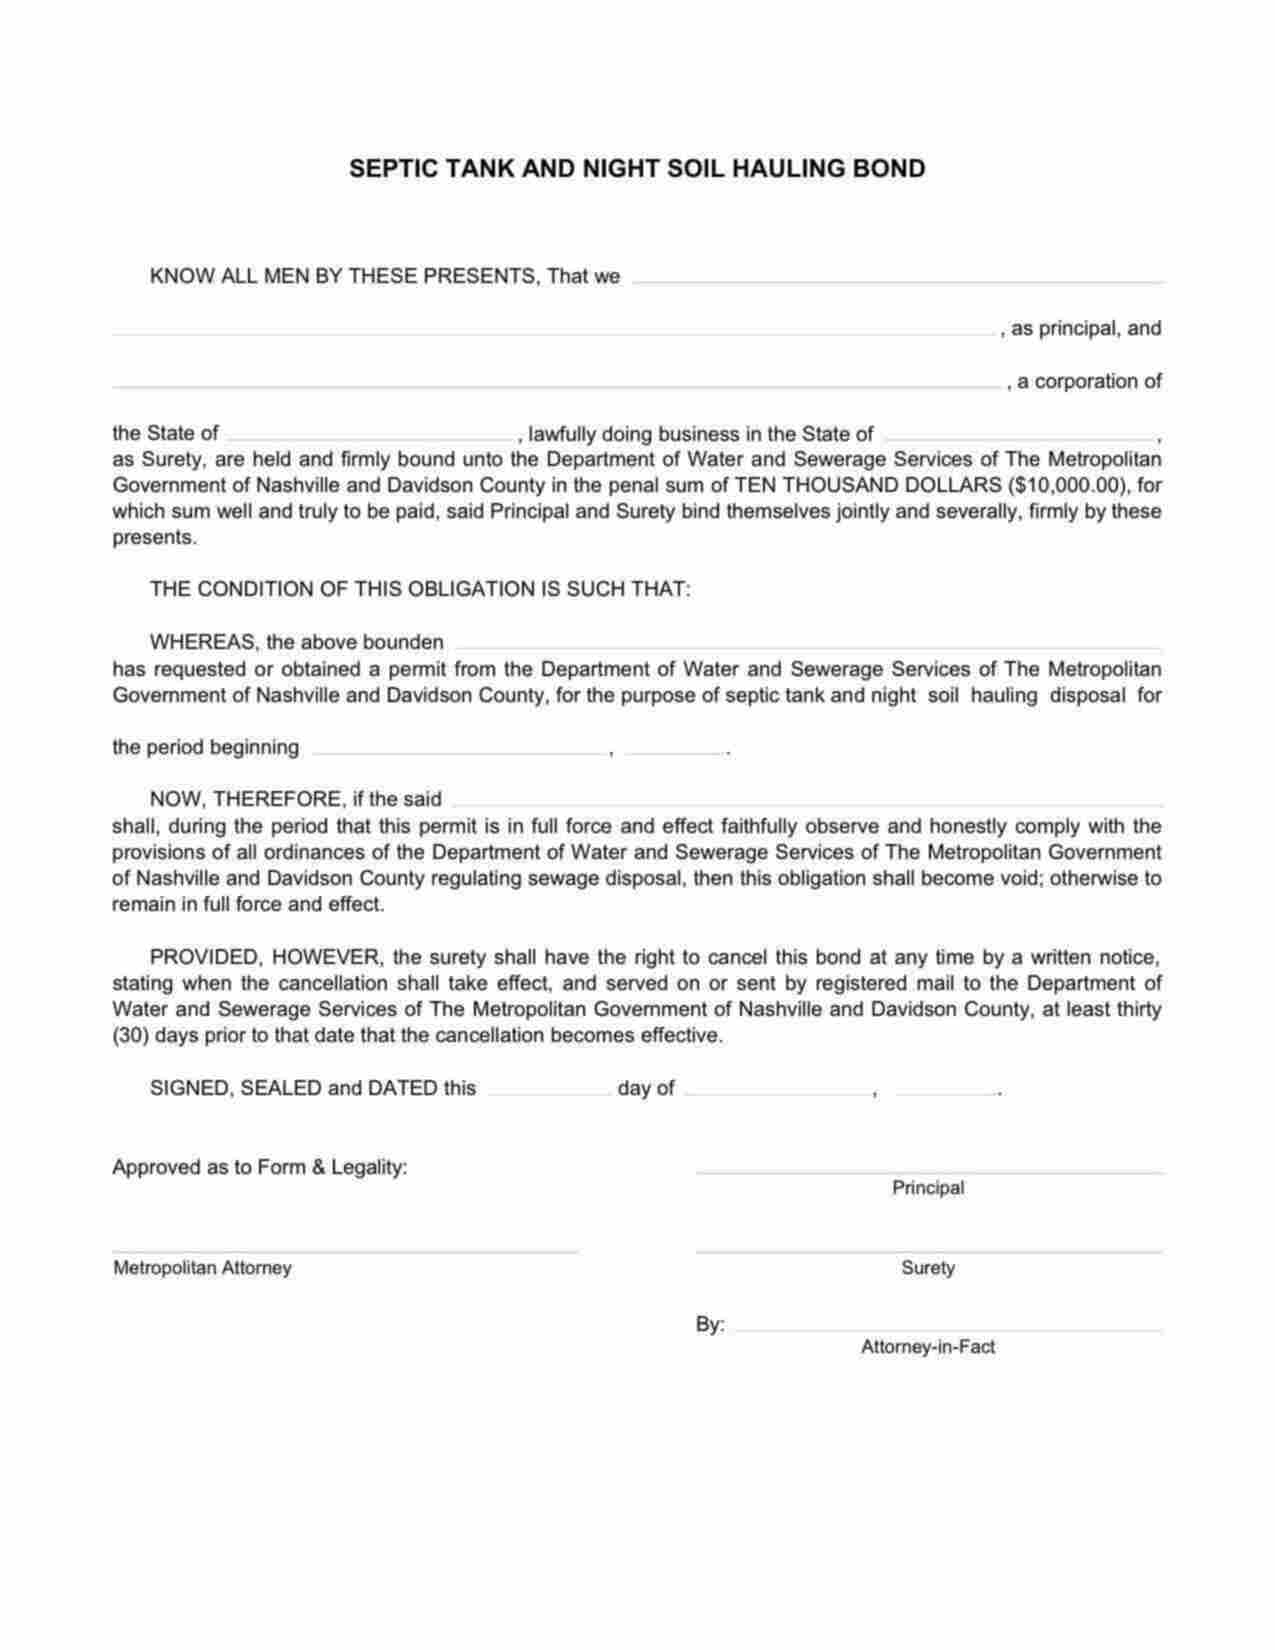 Tennessee Septic Tank and Night Soil Hauling Bond Form